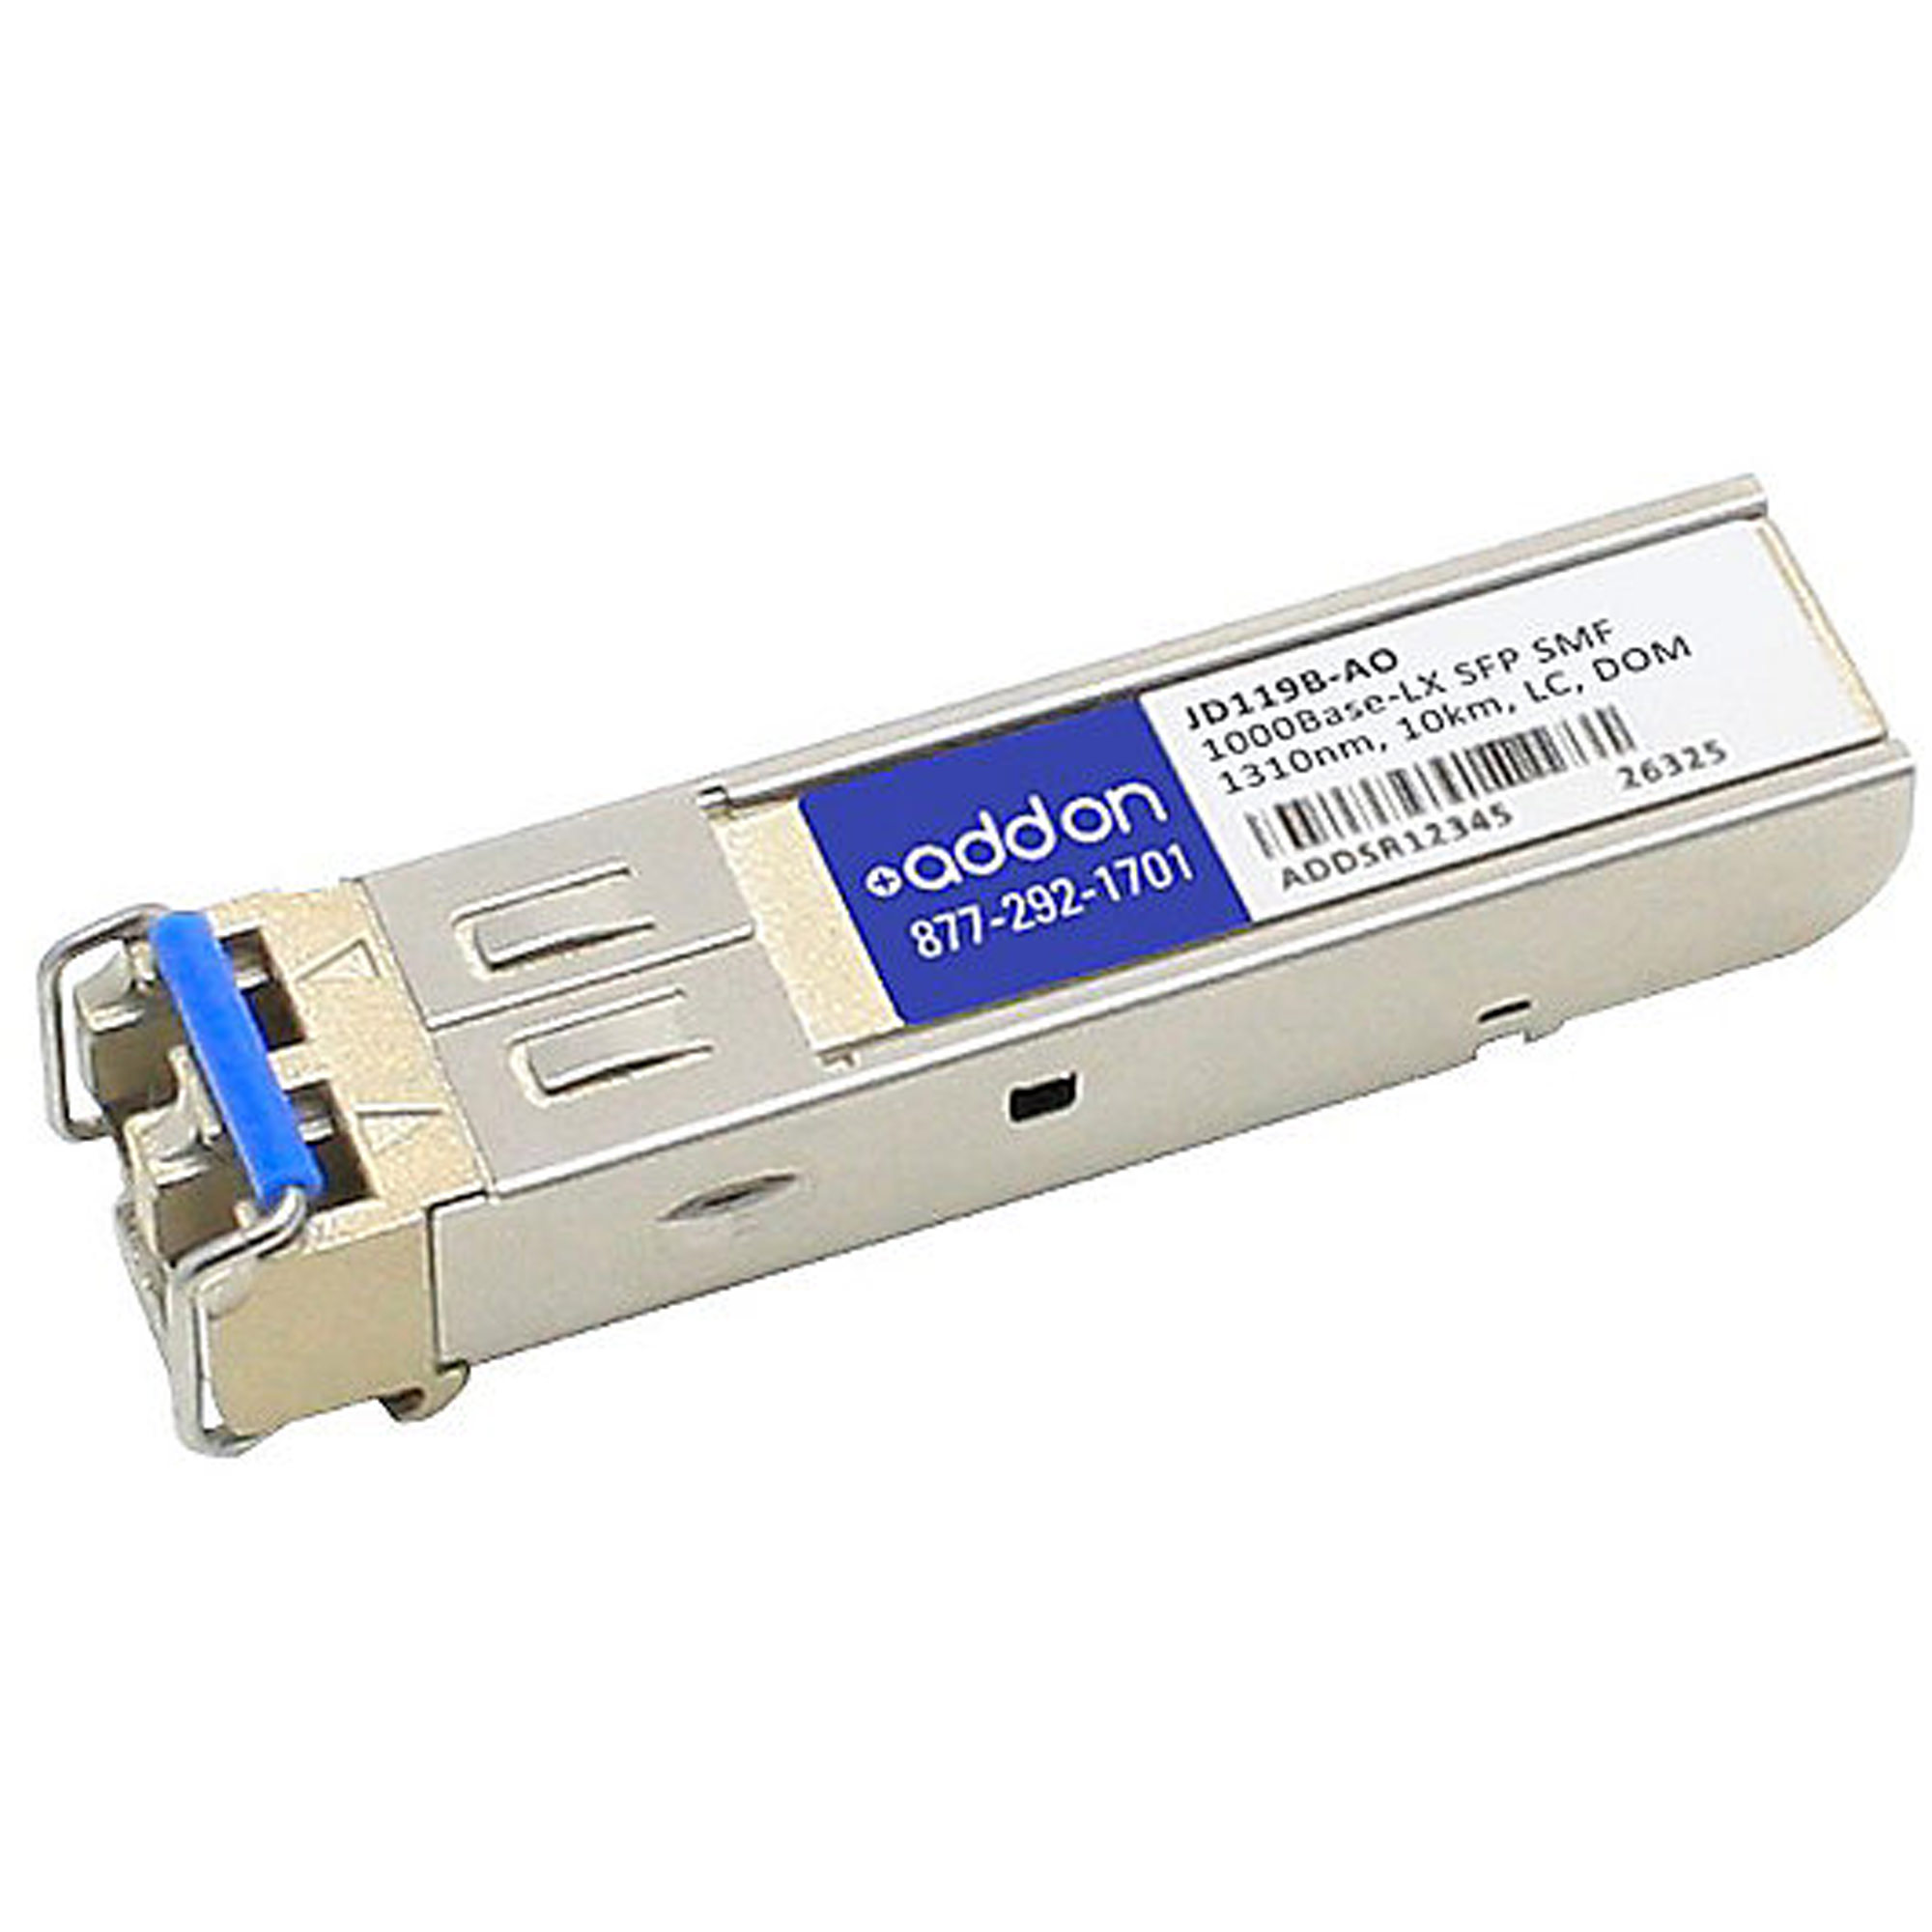 Ixia 1G SFP Copper Transceiver Kit , with cable, for use with xStream, Director, iBypass,